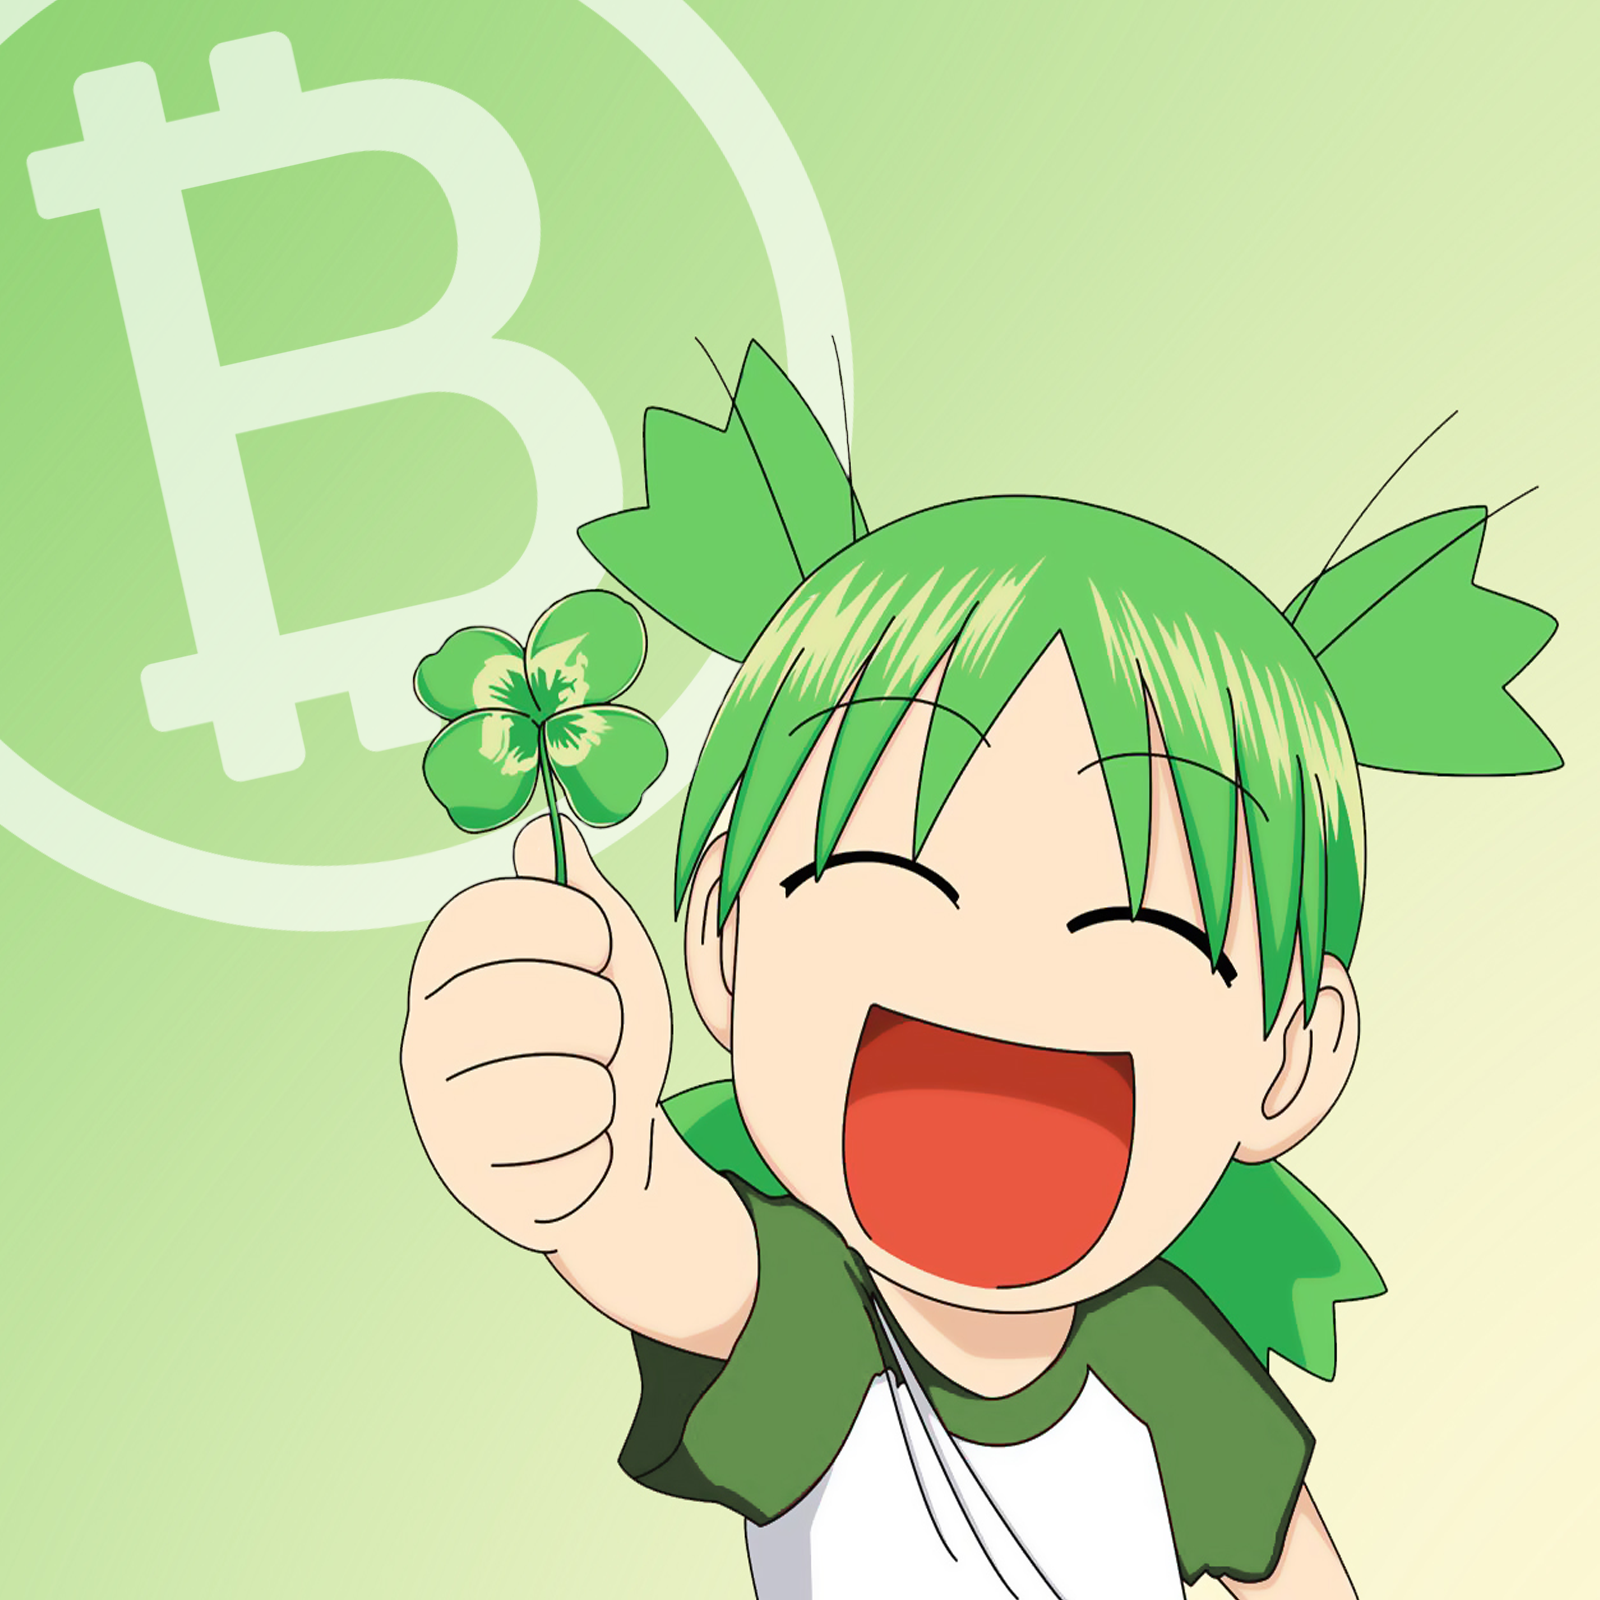 Popular Discussion Board 4chan Now Accepts Cryptocurrencies for Passes